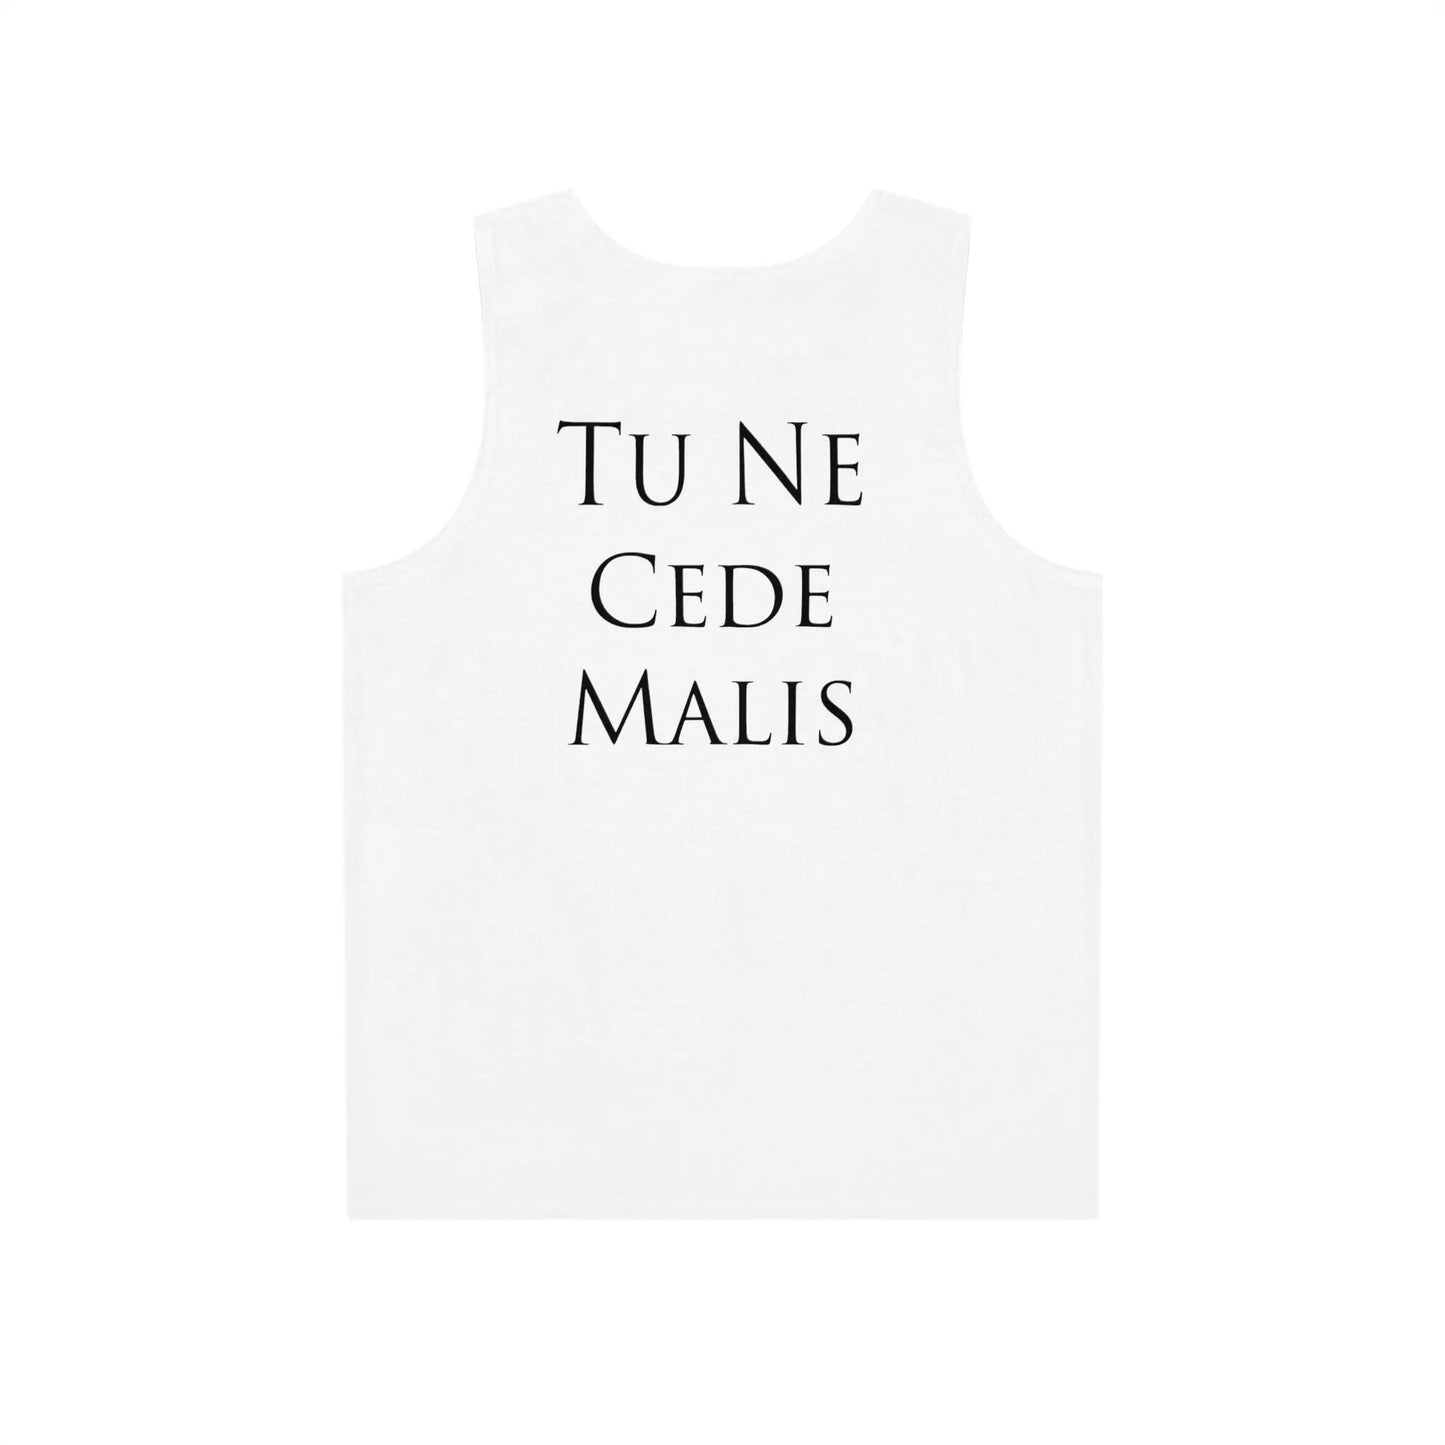 Do Not Give In To Evil Men's Tank